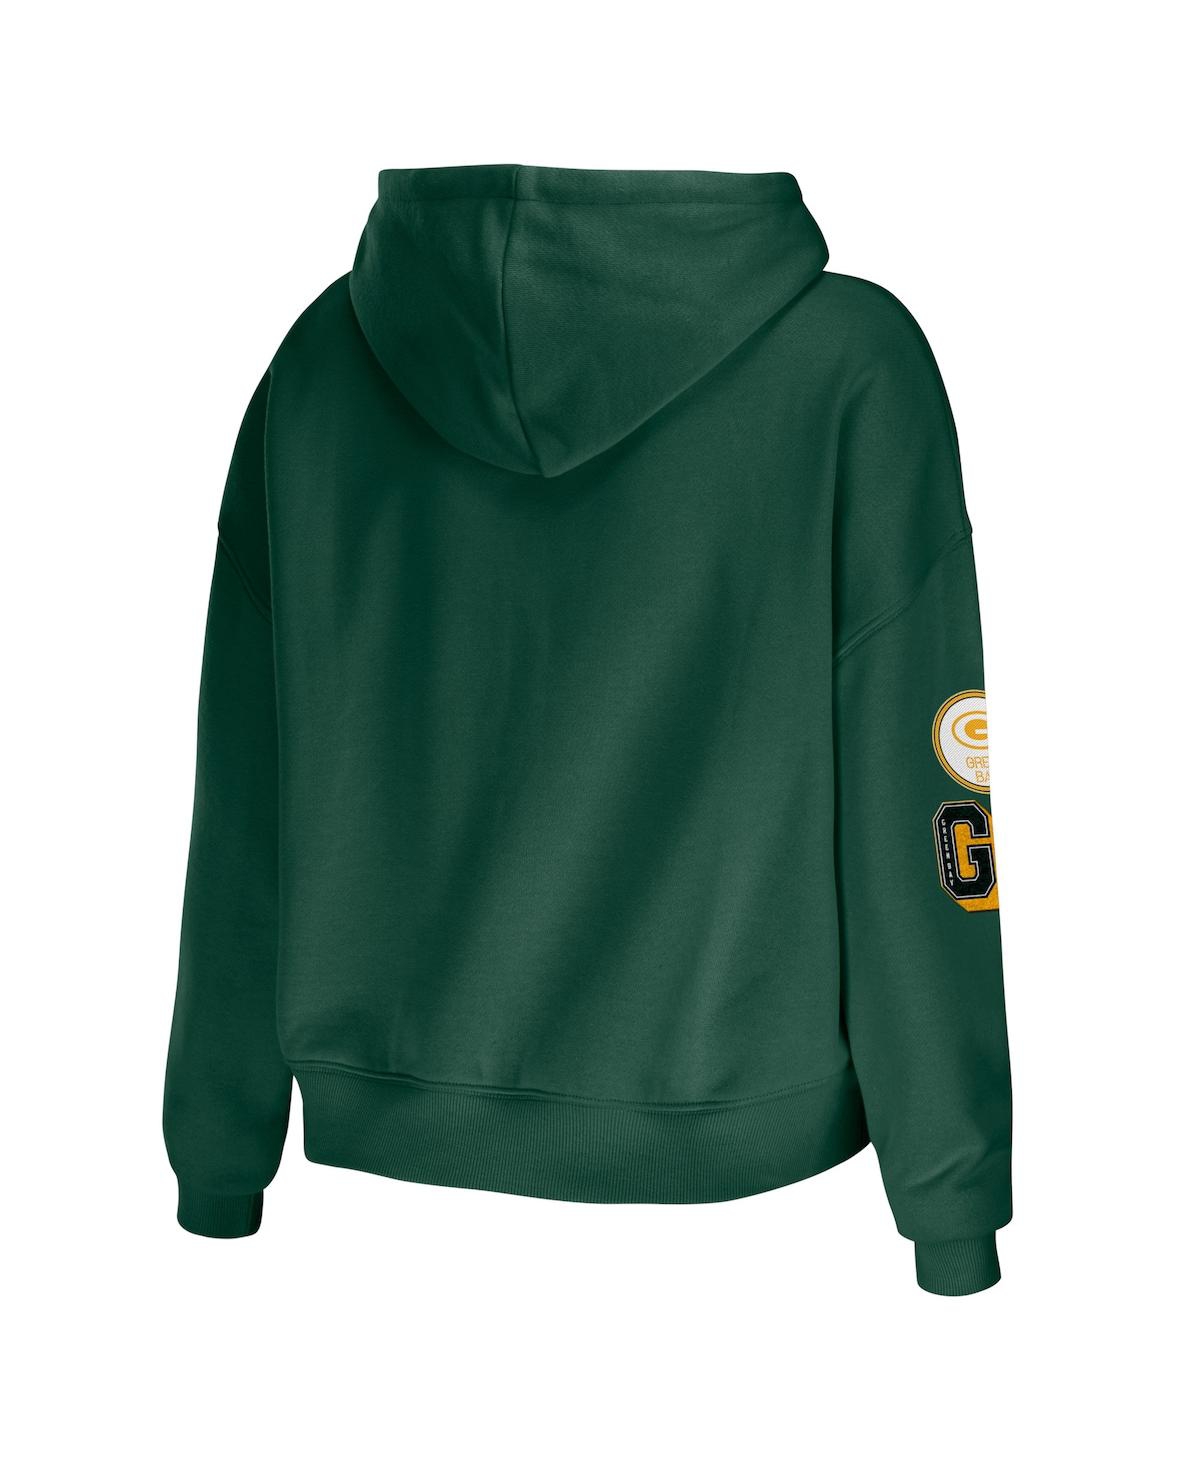 Shop Wear By Erin Andrews Women's  Green Green Bay Packers Modest Cropped Pullover Hoodie